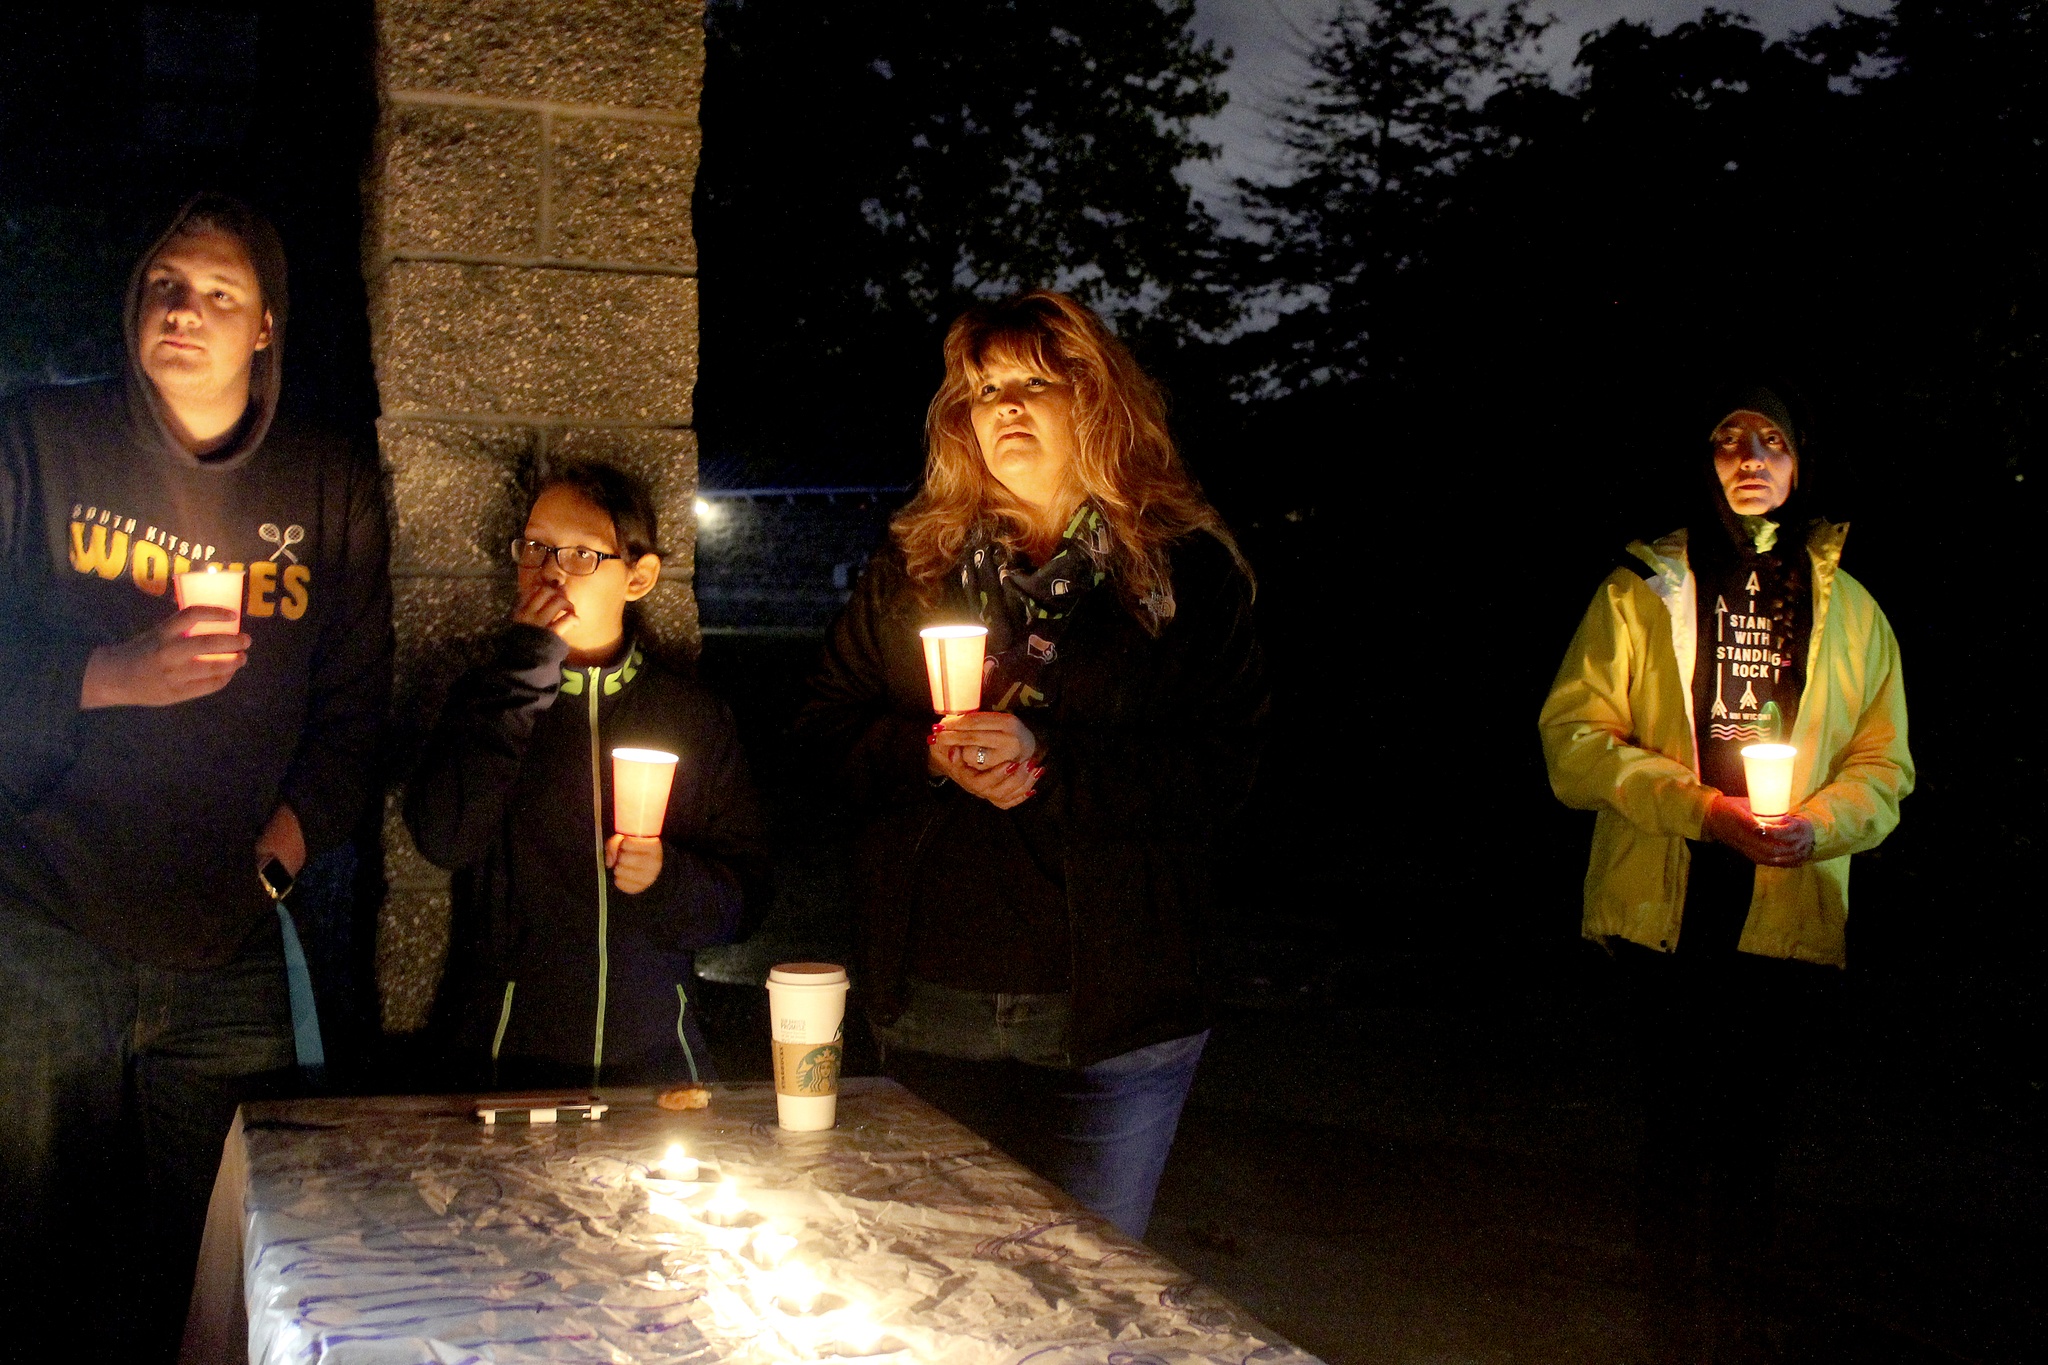 People at the vigil Oct. 30 in support of the Standing Rock protests share their thoughts. Monica Luk, center, is organizing another demonstration for noon to 4 p.m. Nov. 4 at the roundabout in Port Orchard.                                Michelle Beahm / Kitsap News Group